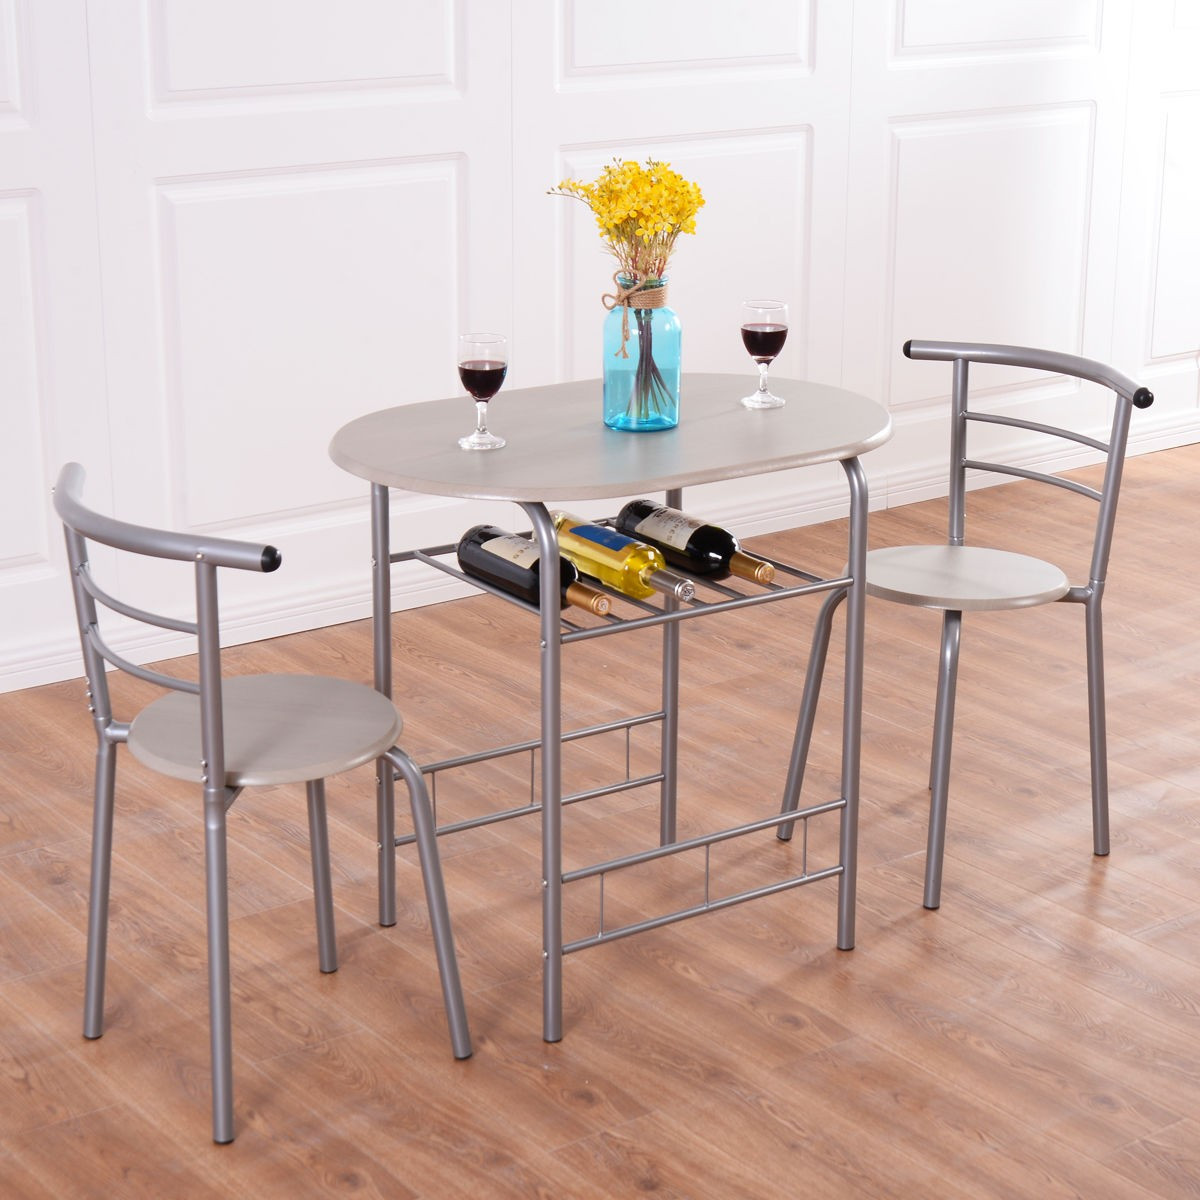 Small Kitchen Bistro Set
 3pcs Bistro Dining Set Small Kitchen Indoor Outdoor Table